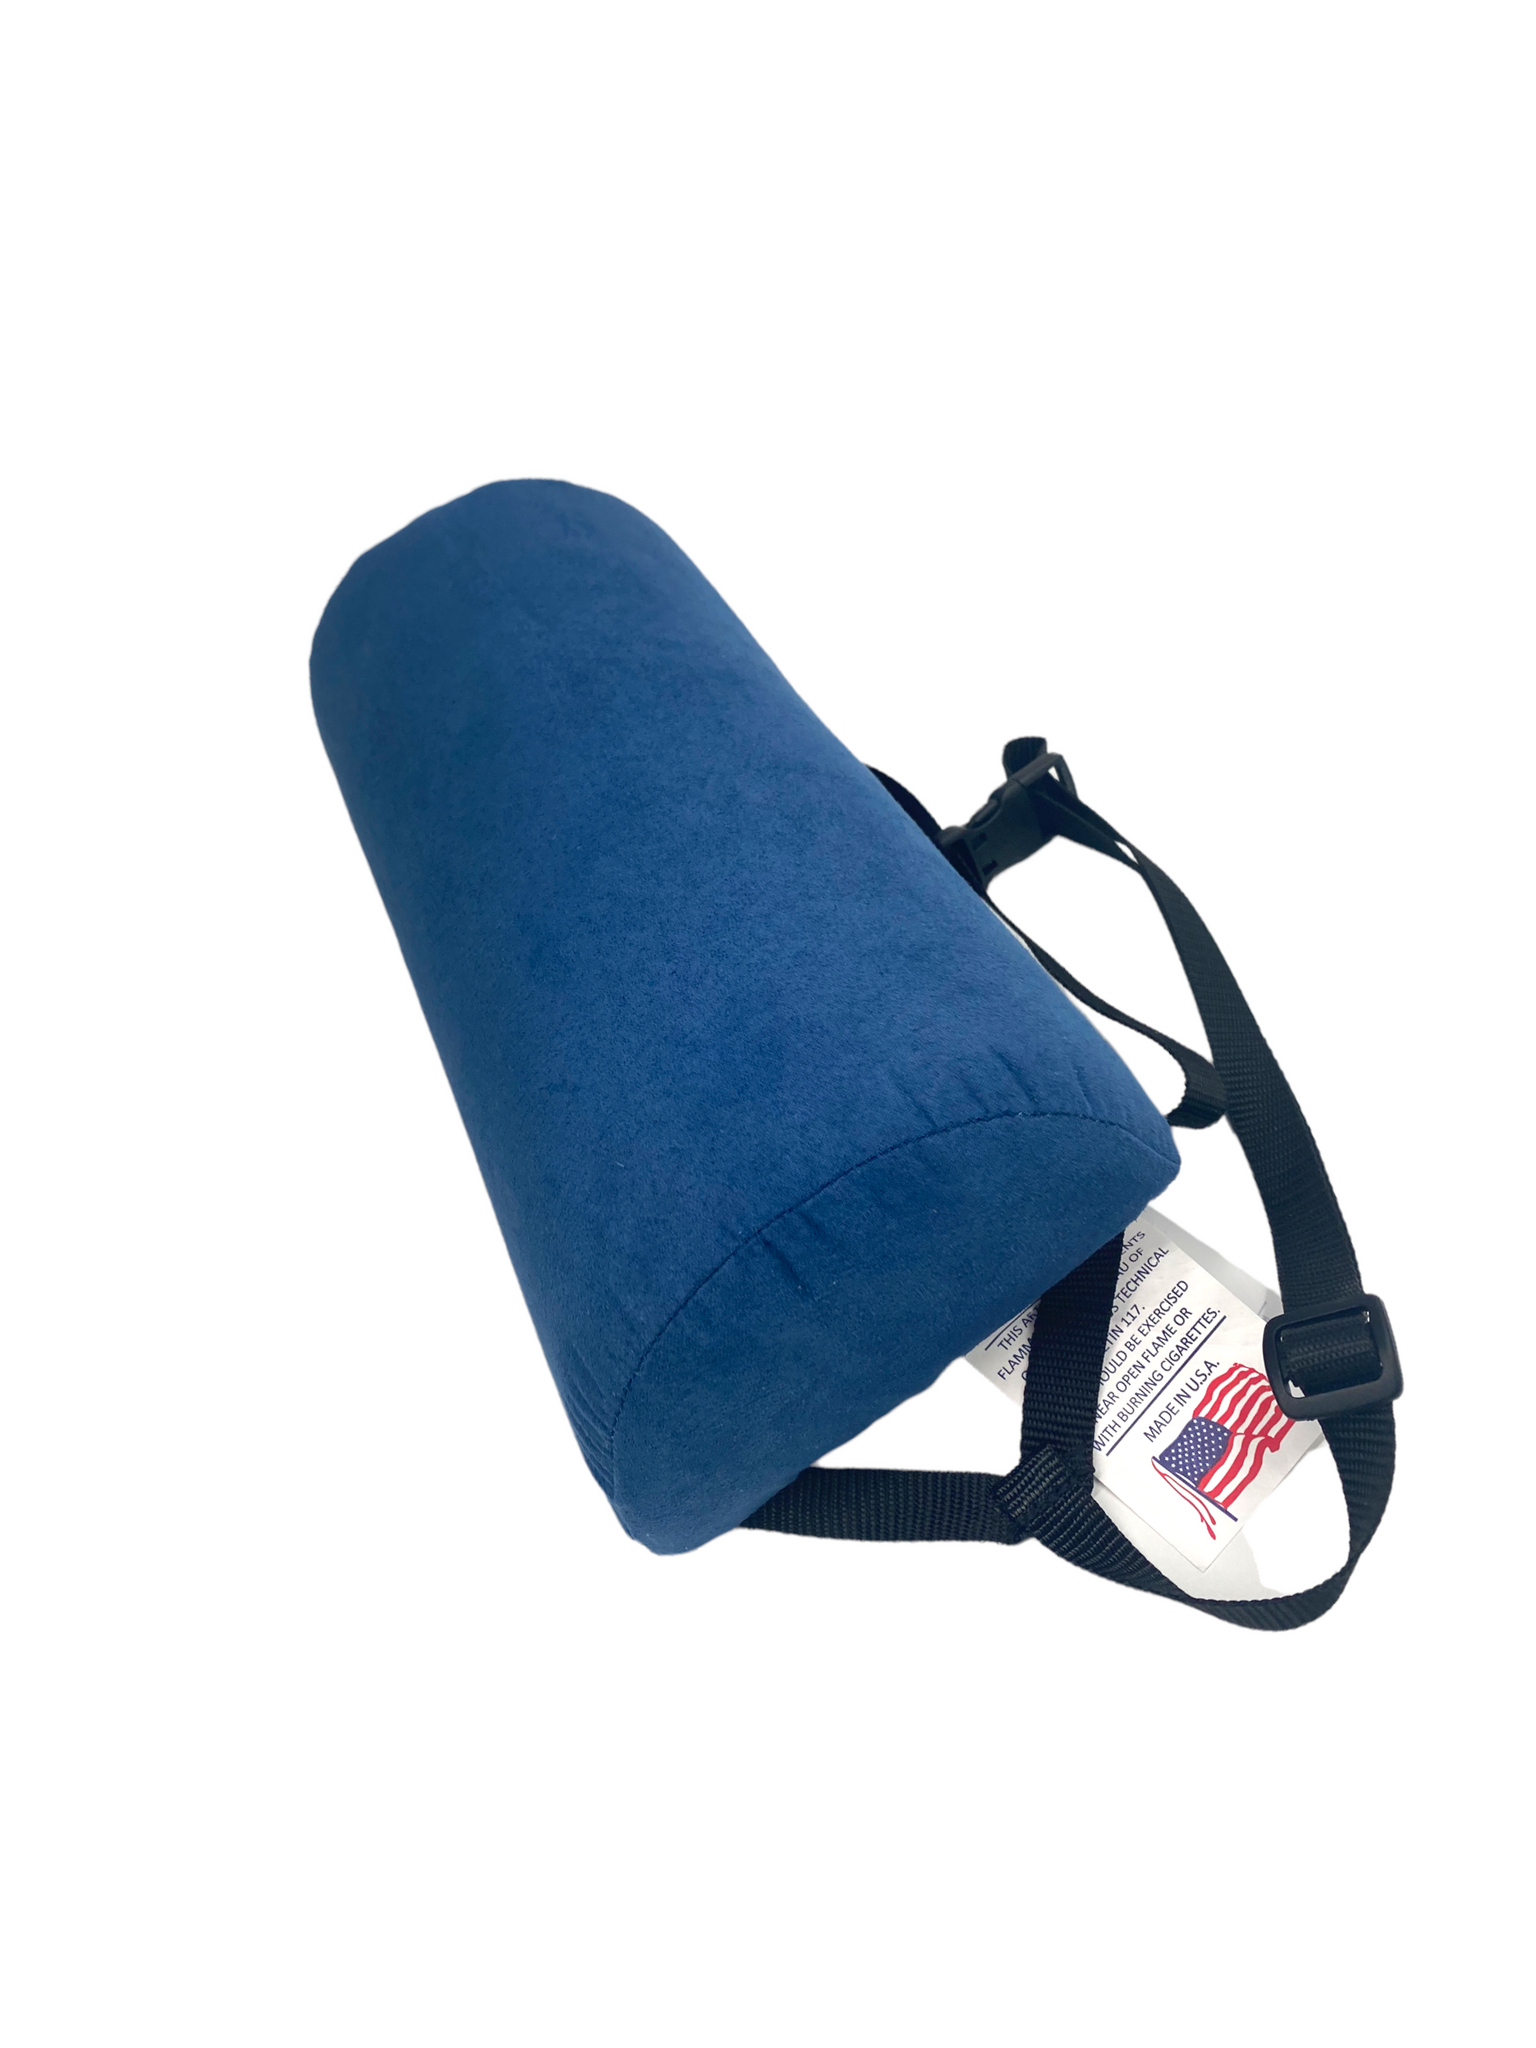 Extended Tush Cush Orthopedic Seat Cushion Relieves and Prevents Pain